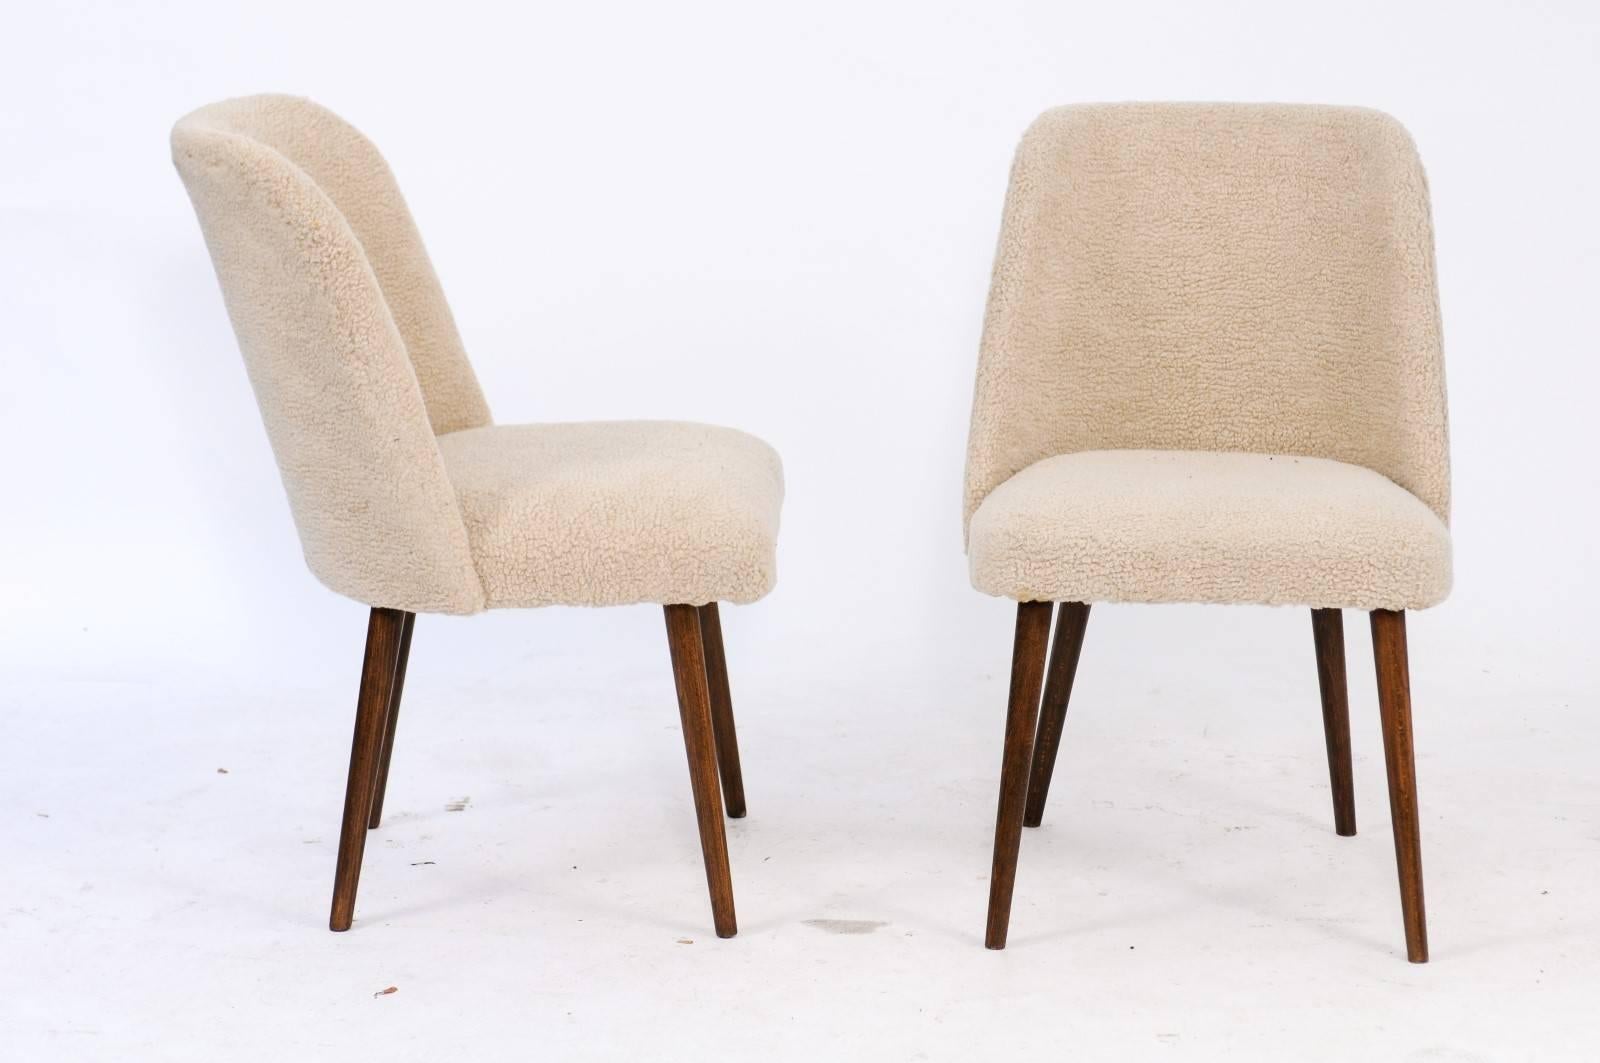 20th Century Pair of French Mouton Upholstered Side Chairs from the Mid-Century